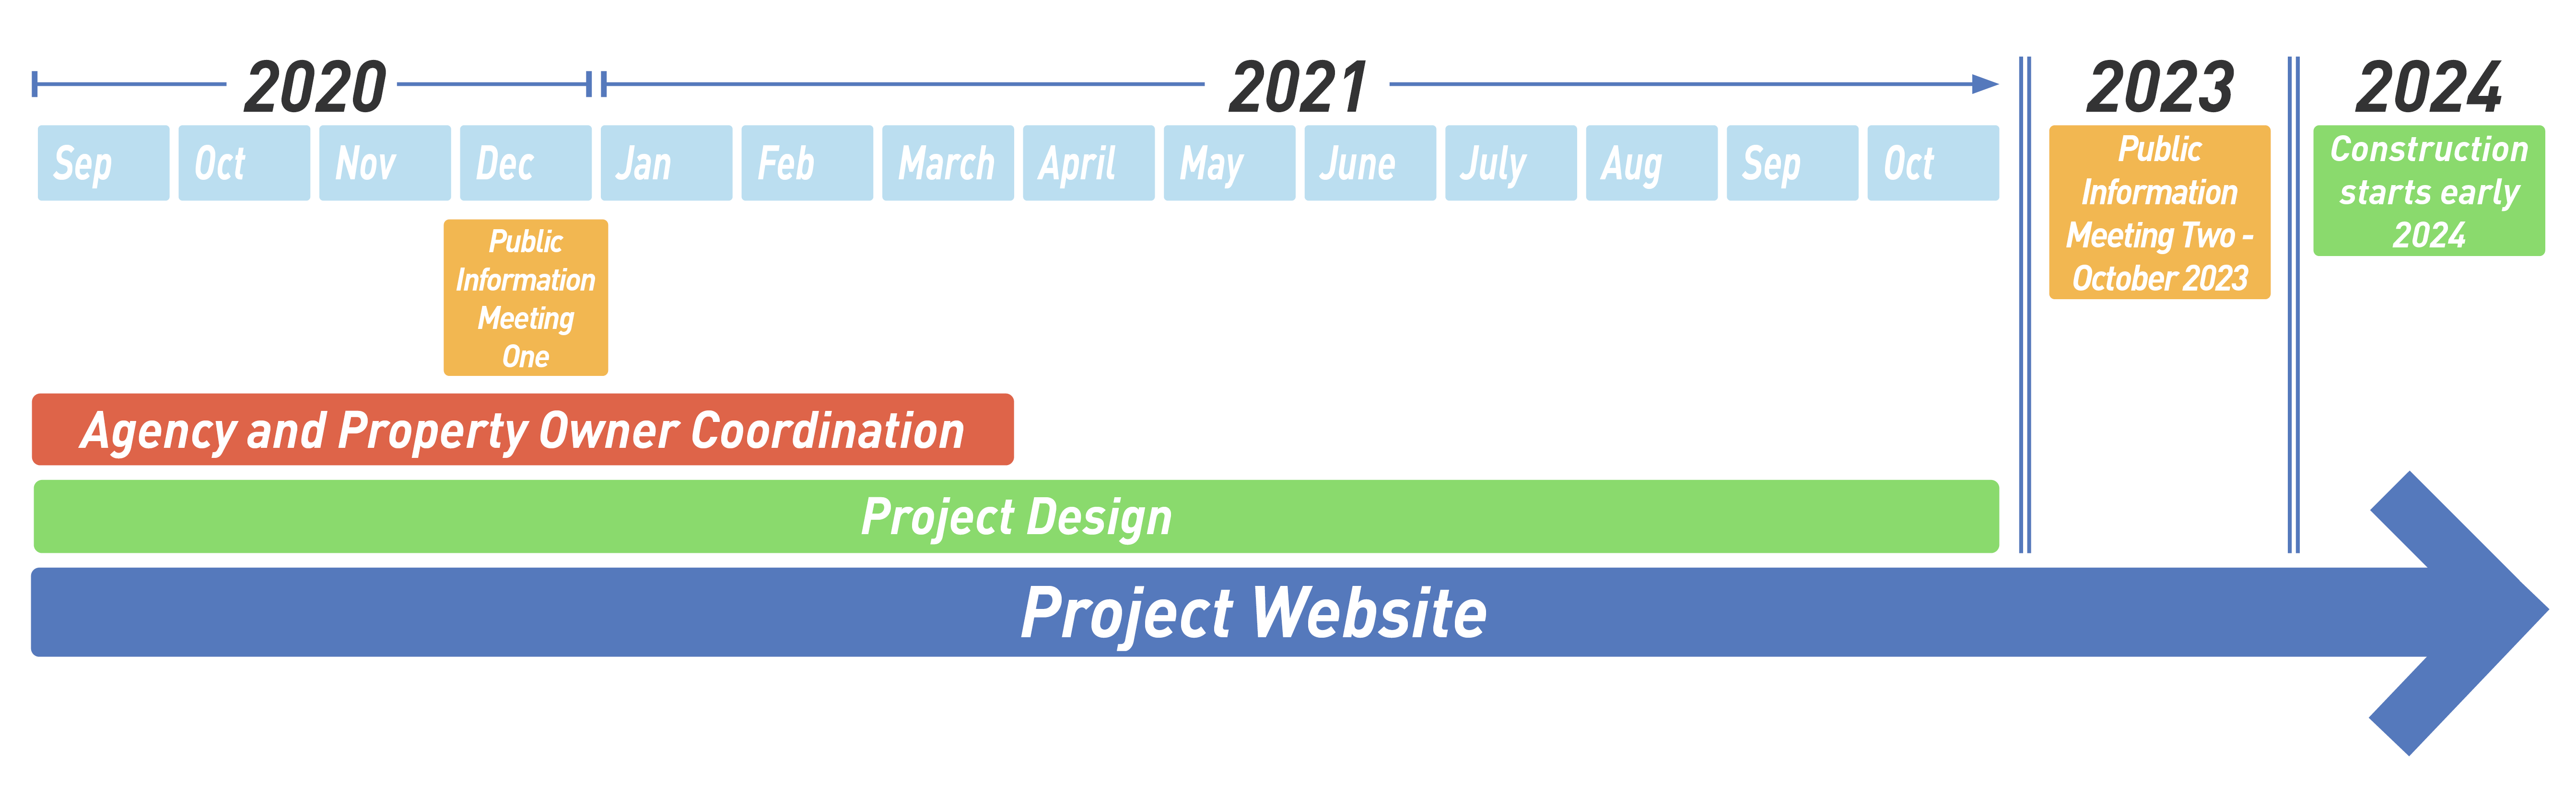 Project Engagement Schedule